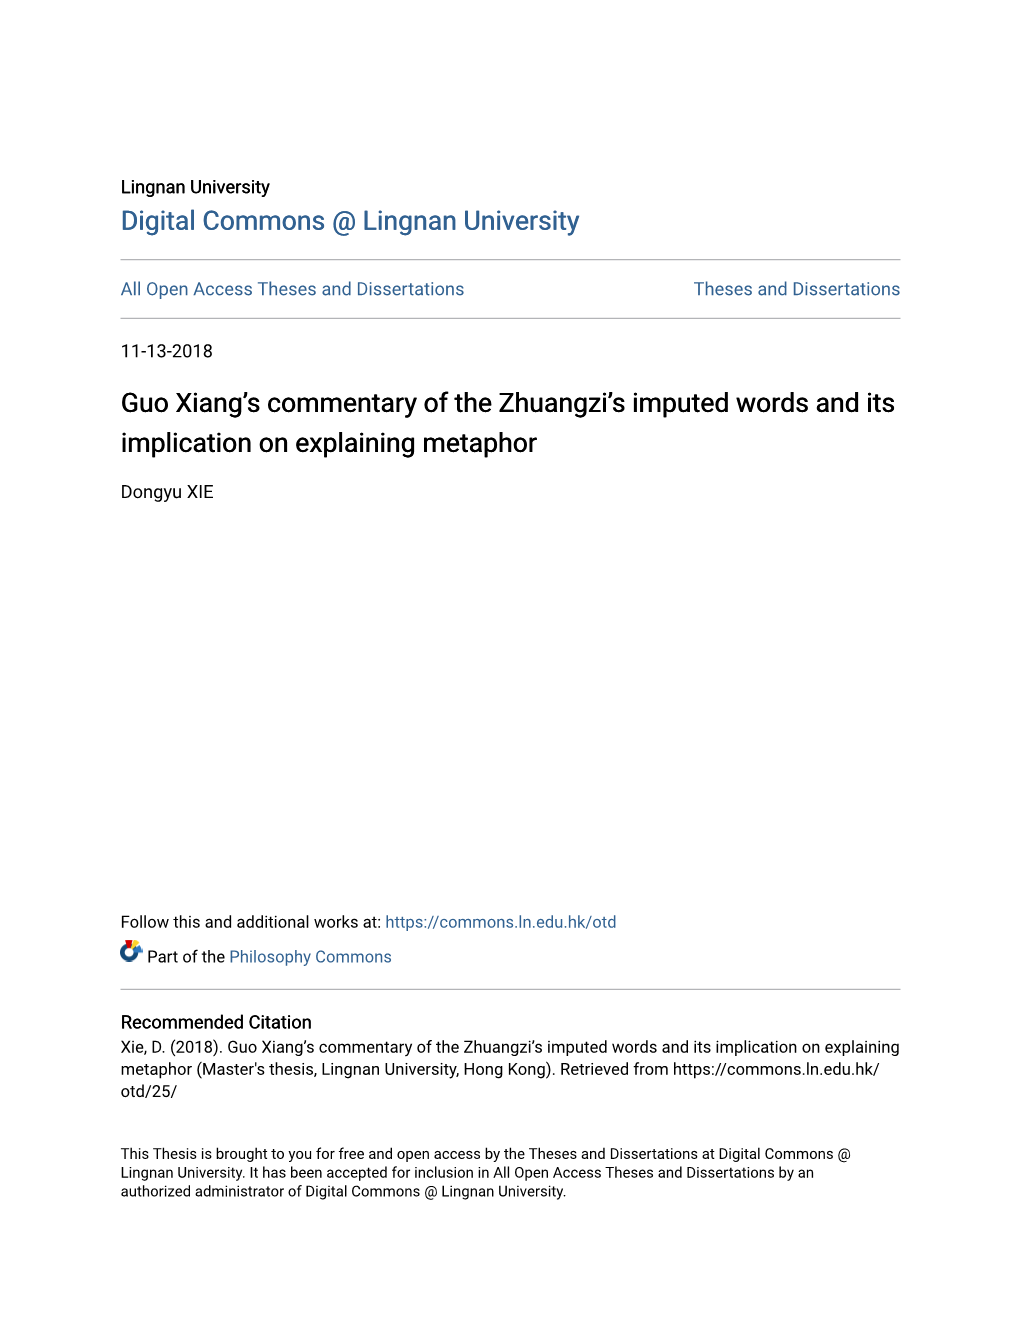 Guo Xiang's Commentary of the Zhuangzi's Imputed Words and Its Implication on Explaining Metaphor